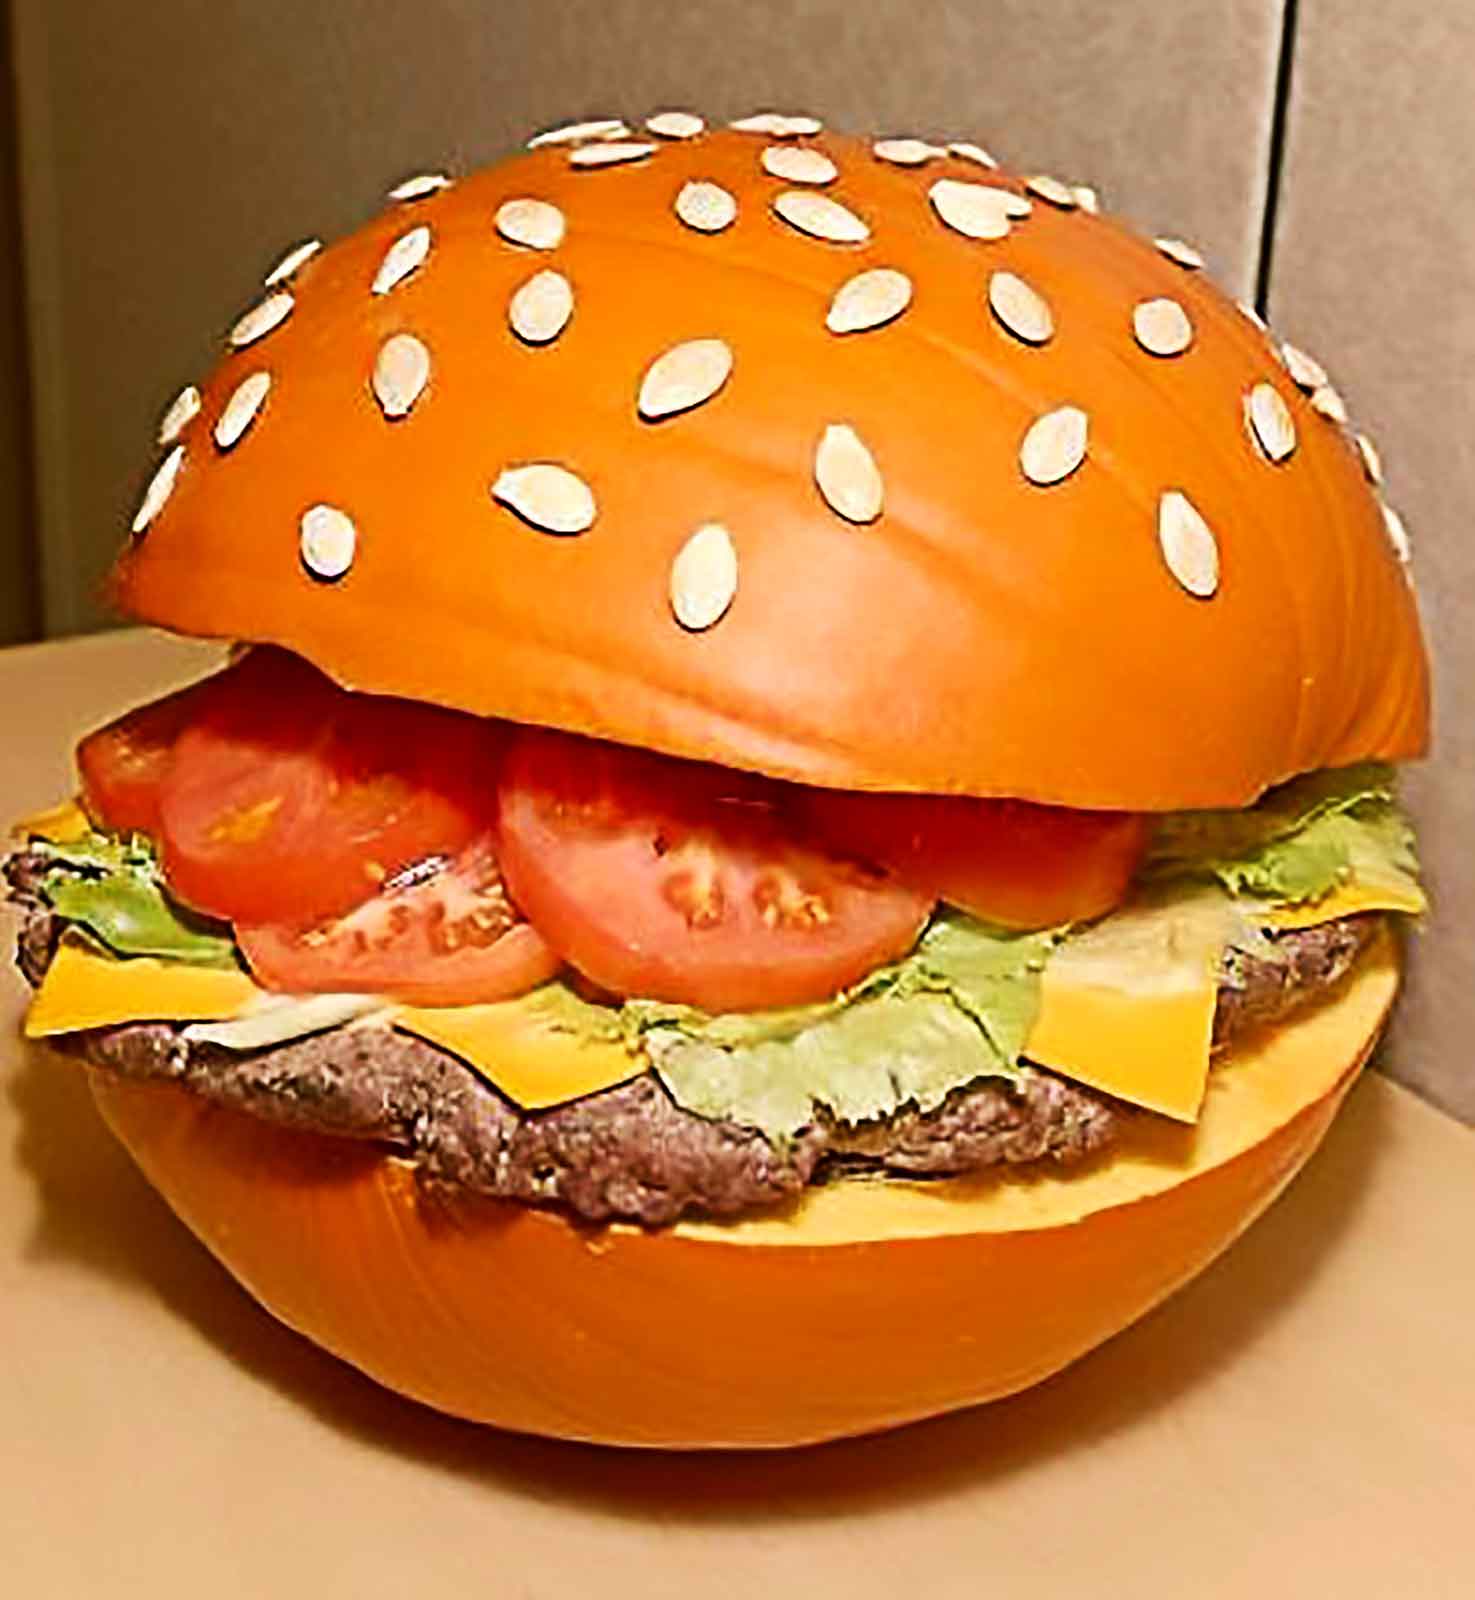 Ridiculous Halloween Hamburger Pumpkin Carving: Have You Seen This Yet?